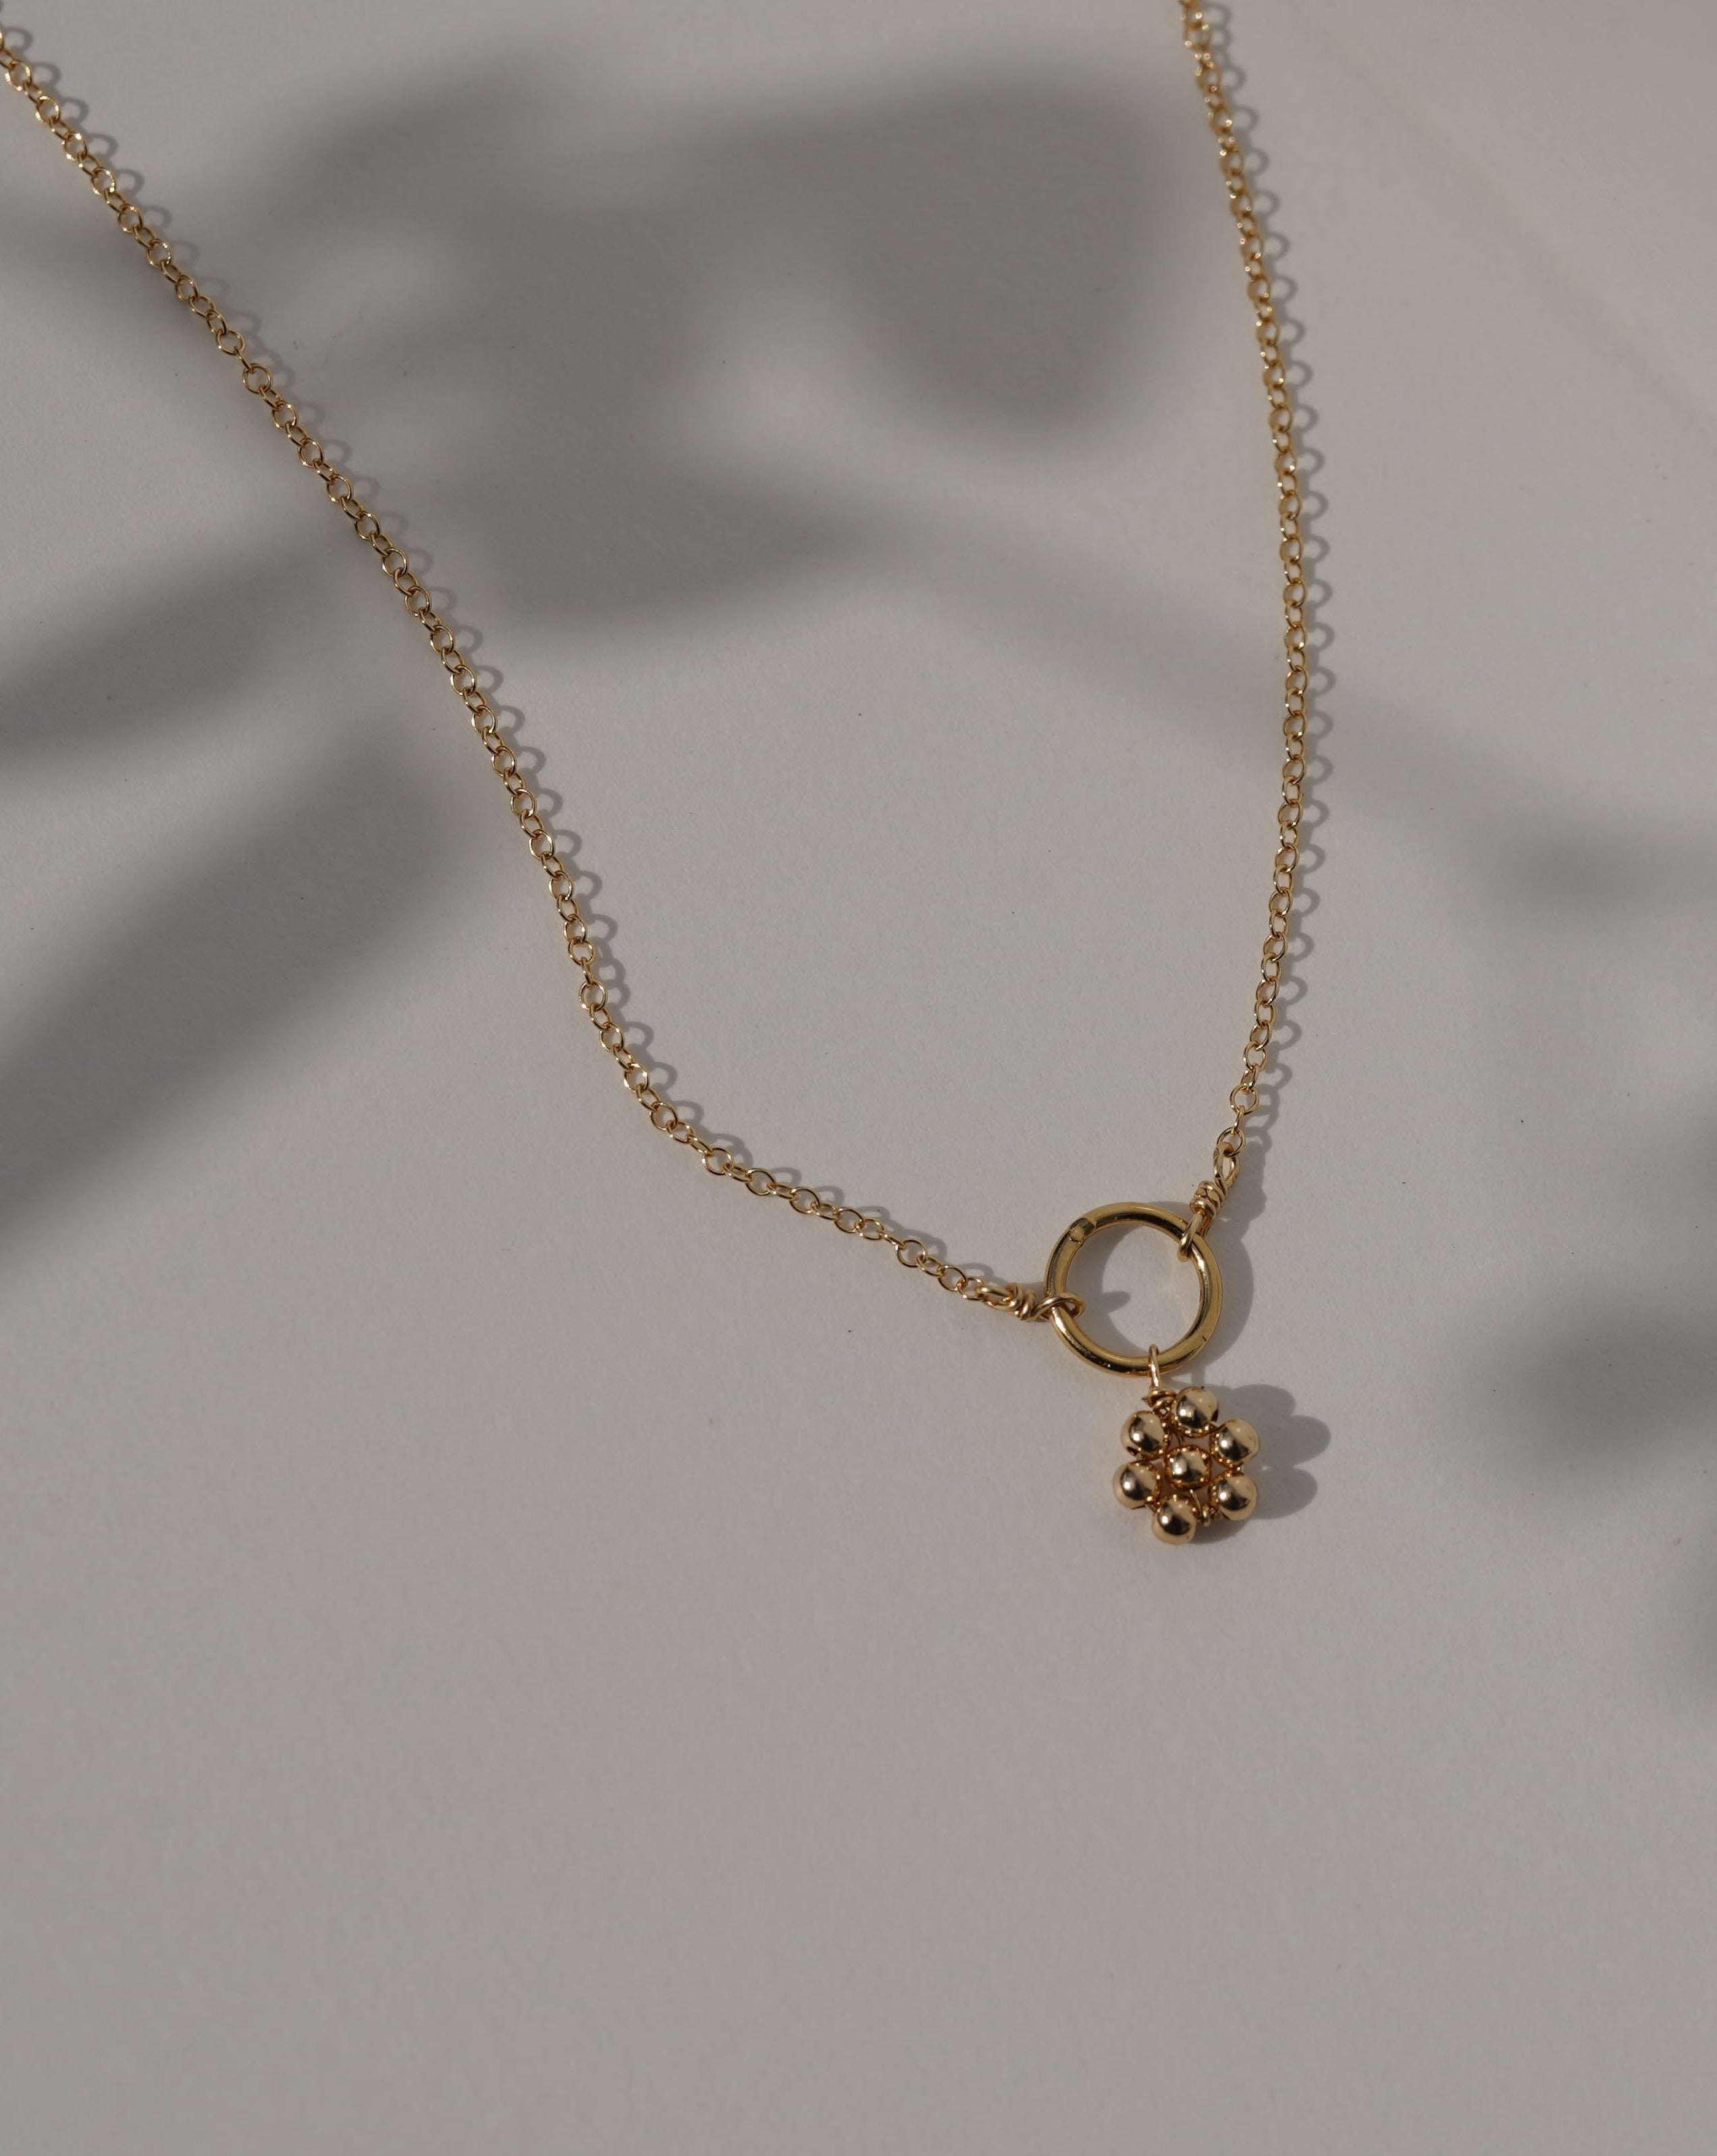 Luella Necklace by KOZAKH. A 16 to 18 inch adjustable length necklace, crafted in 14K Gold Filled, featuring a handmade beaded daisy charm.